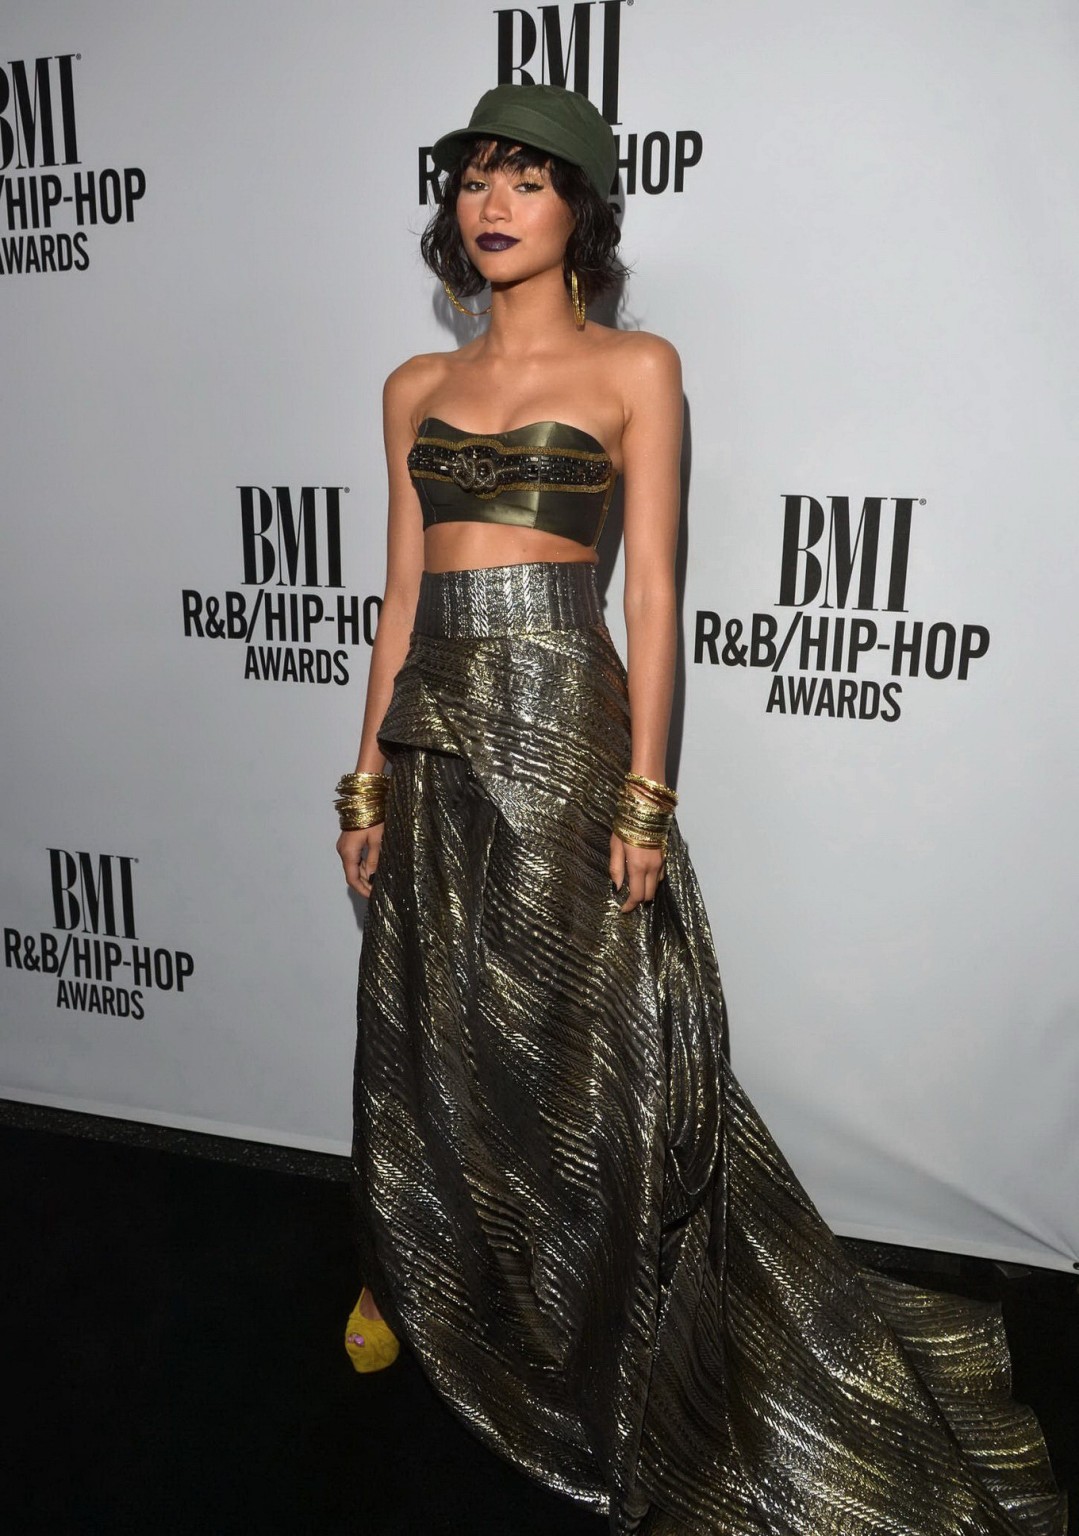 Zendaya Coleman shows off her boobs in a tiny belly top at BMI RB Hip Hop Awards #75187541